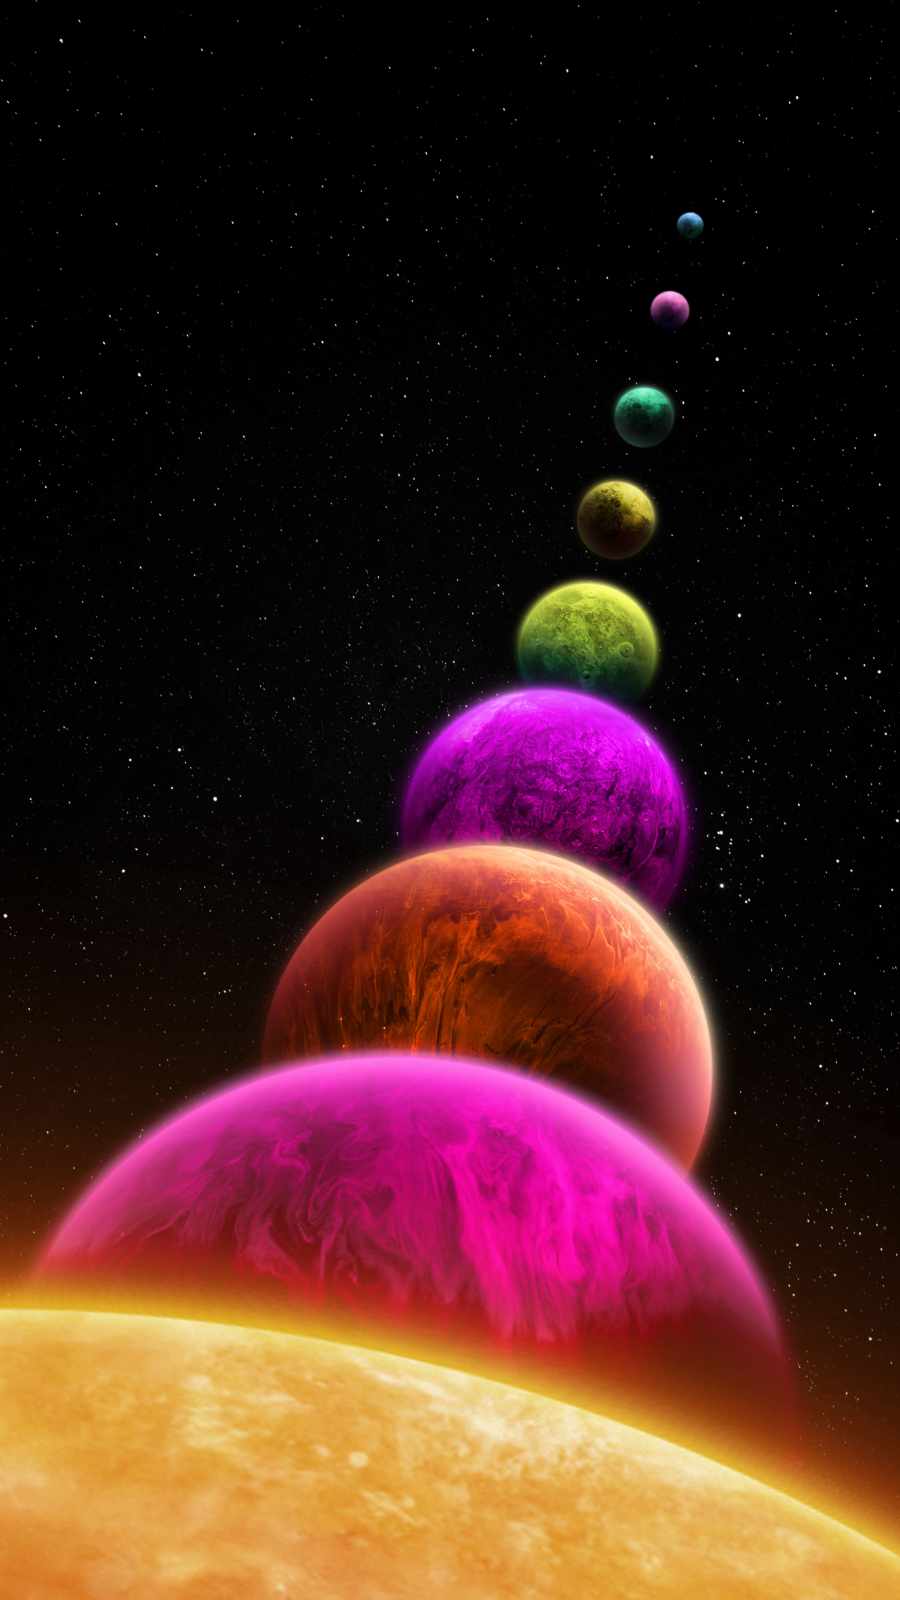 Solar System Planets iPhone Wallpaper